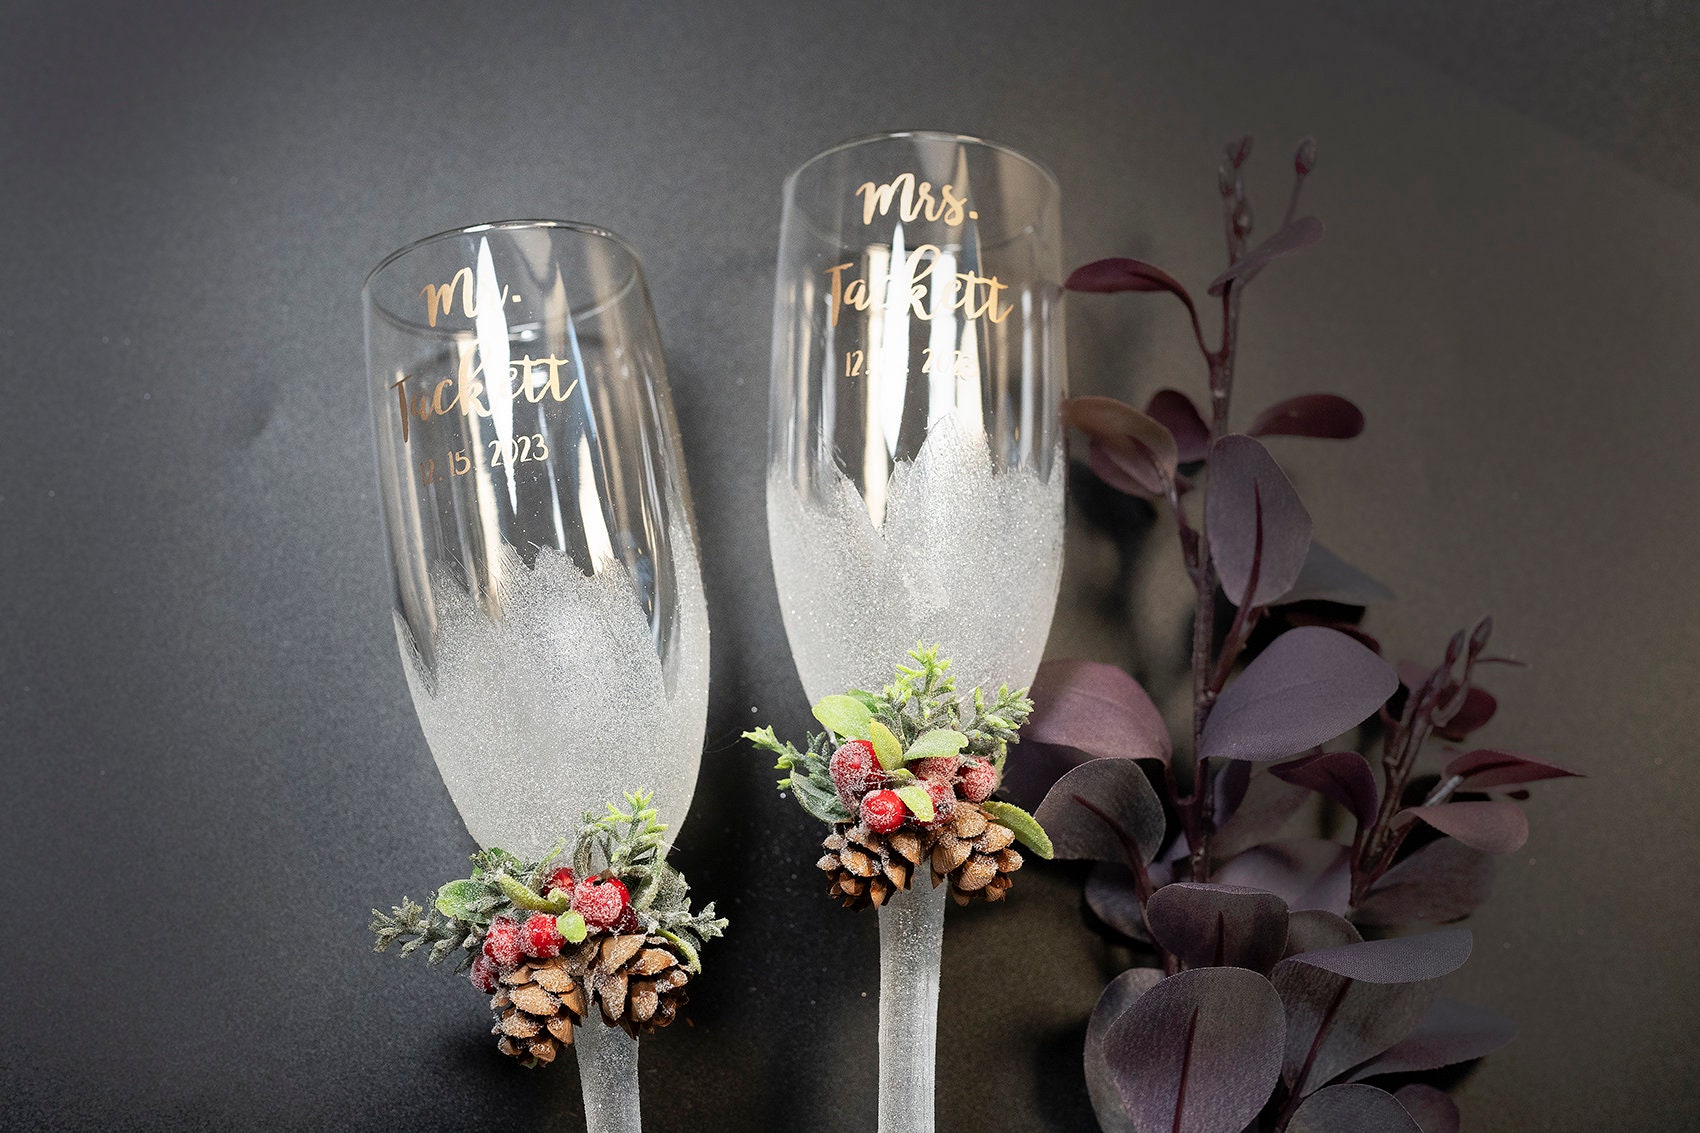 2-piece Creative Champagne Glass Set Wedding Crystal Glasses Heart-shaped  Wedding Champagne Gift Cut Glasses, Silver